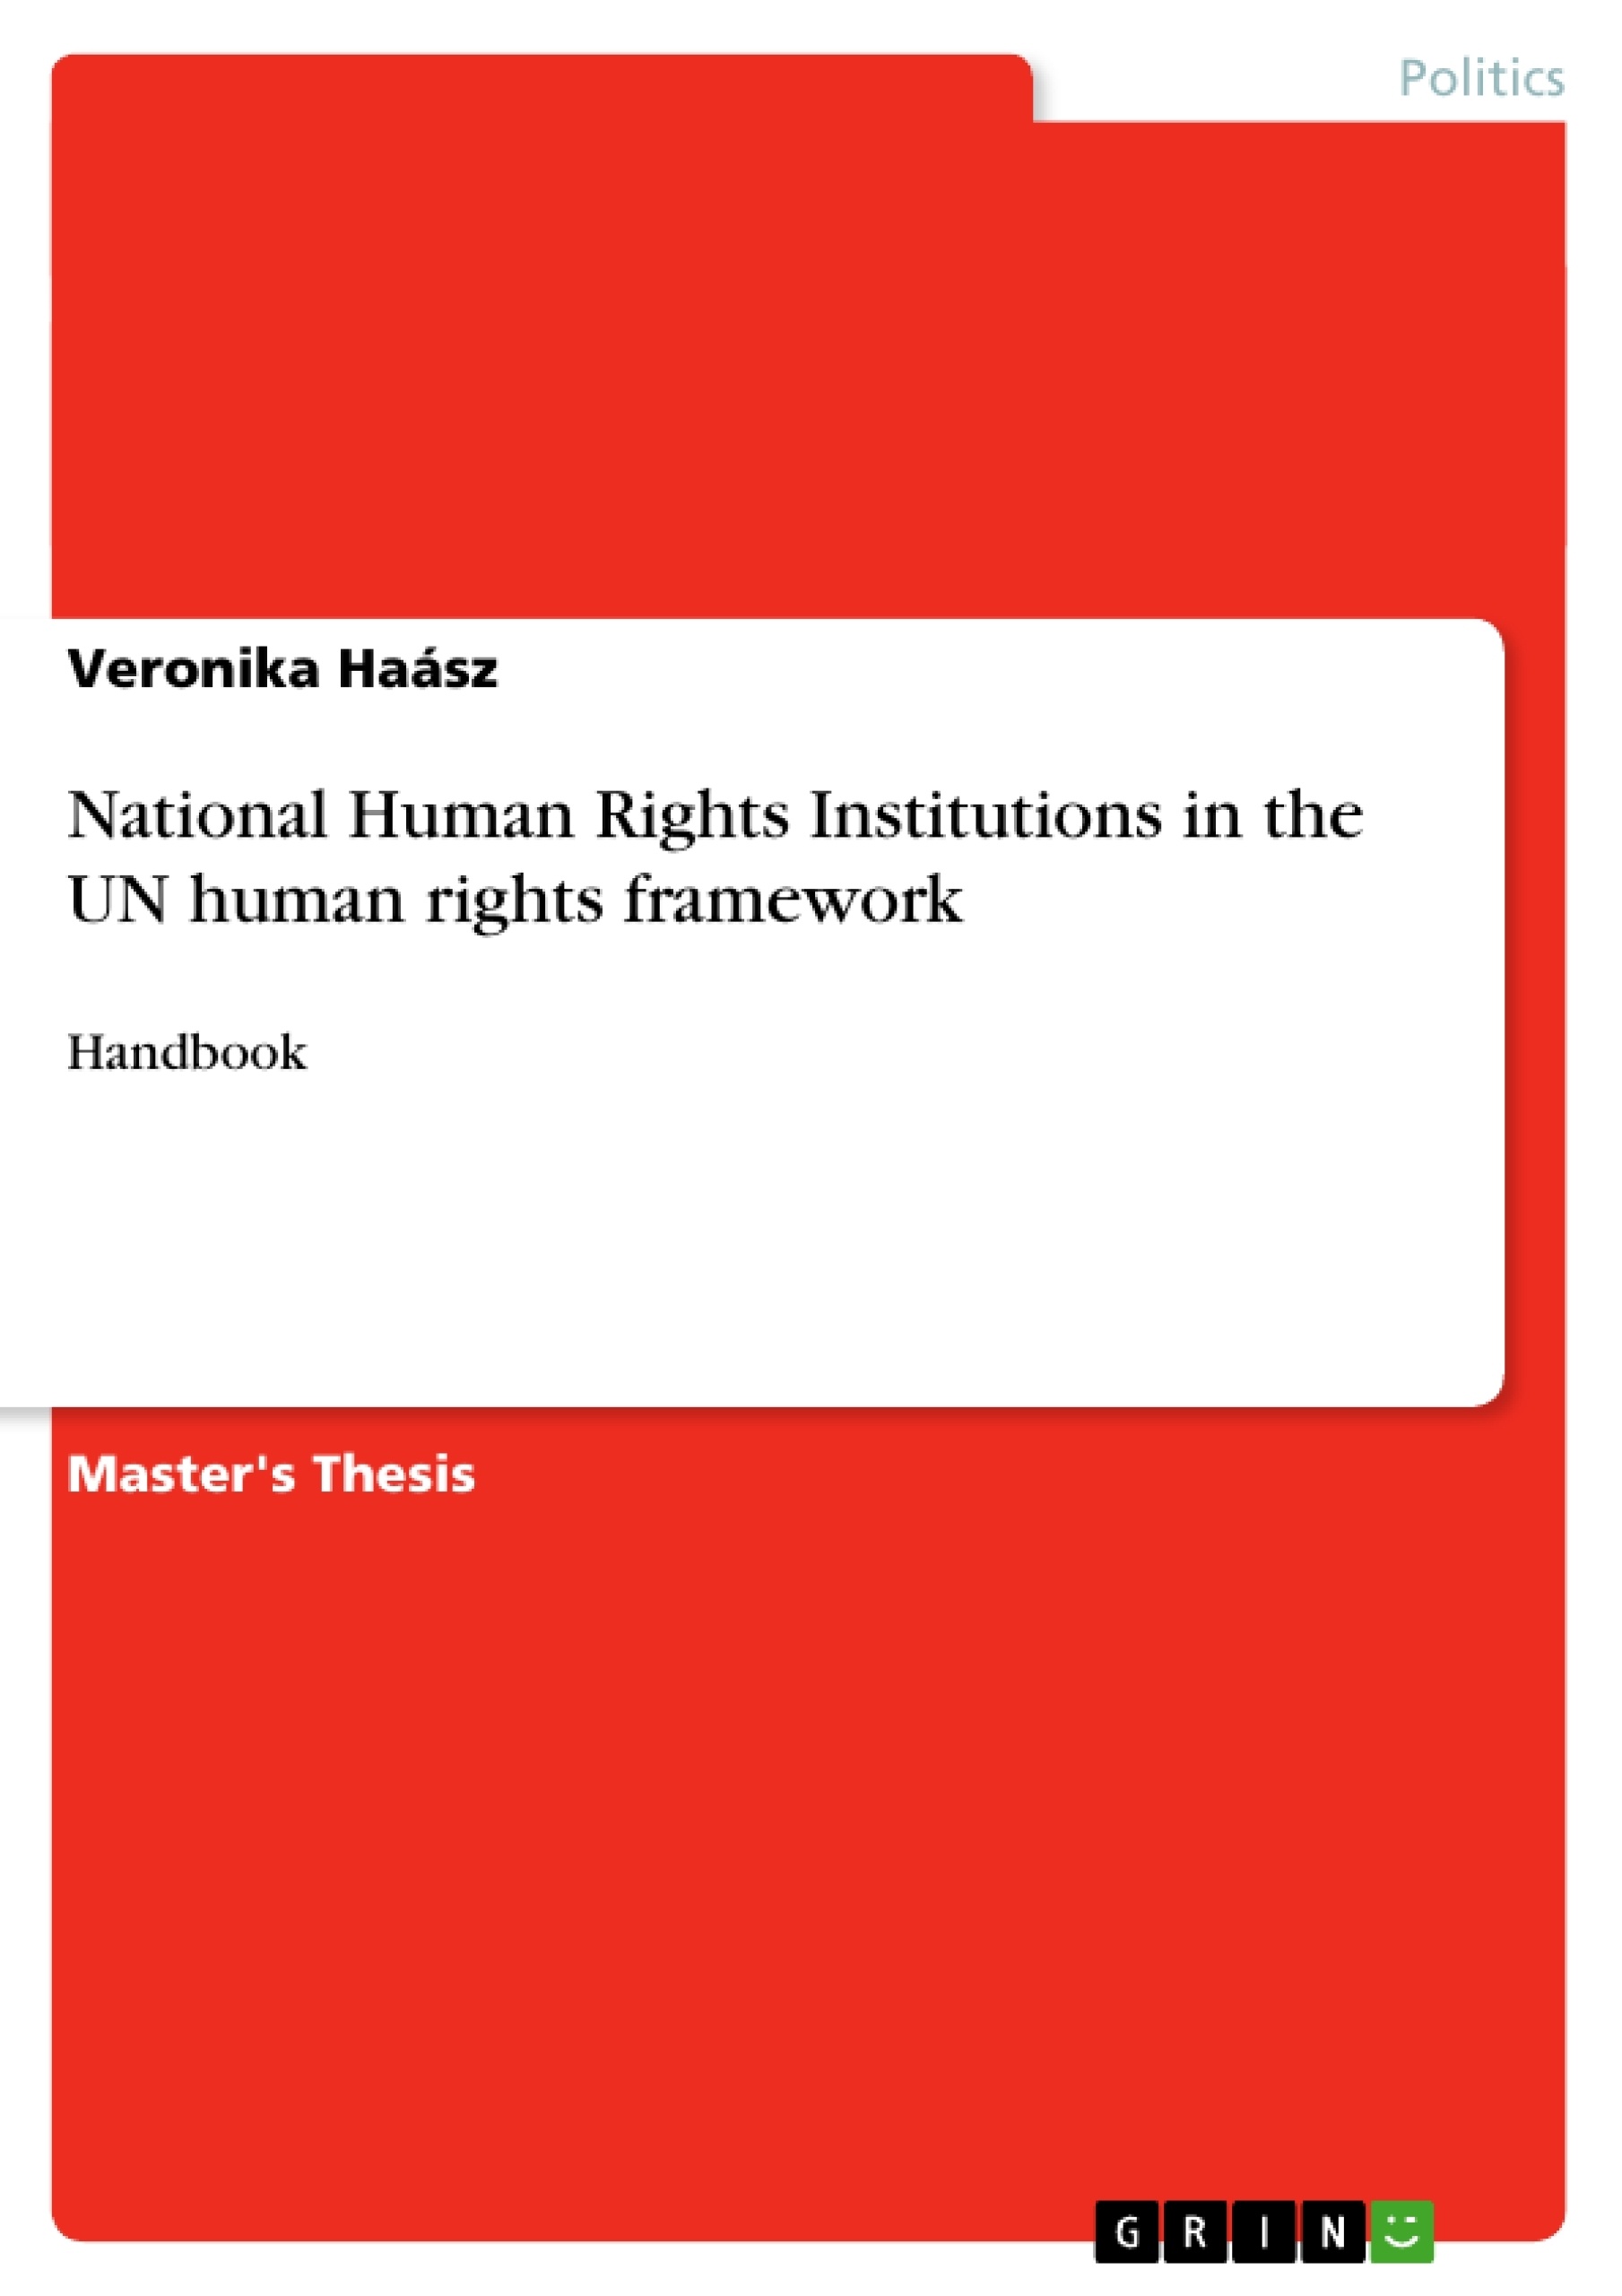 Title: National Human Rights Institutions in the UN human rights framework